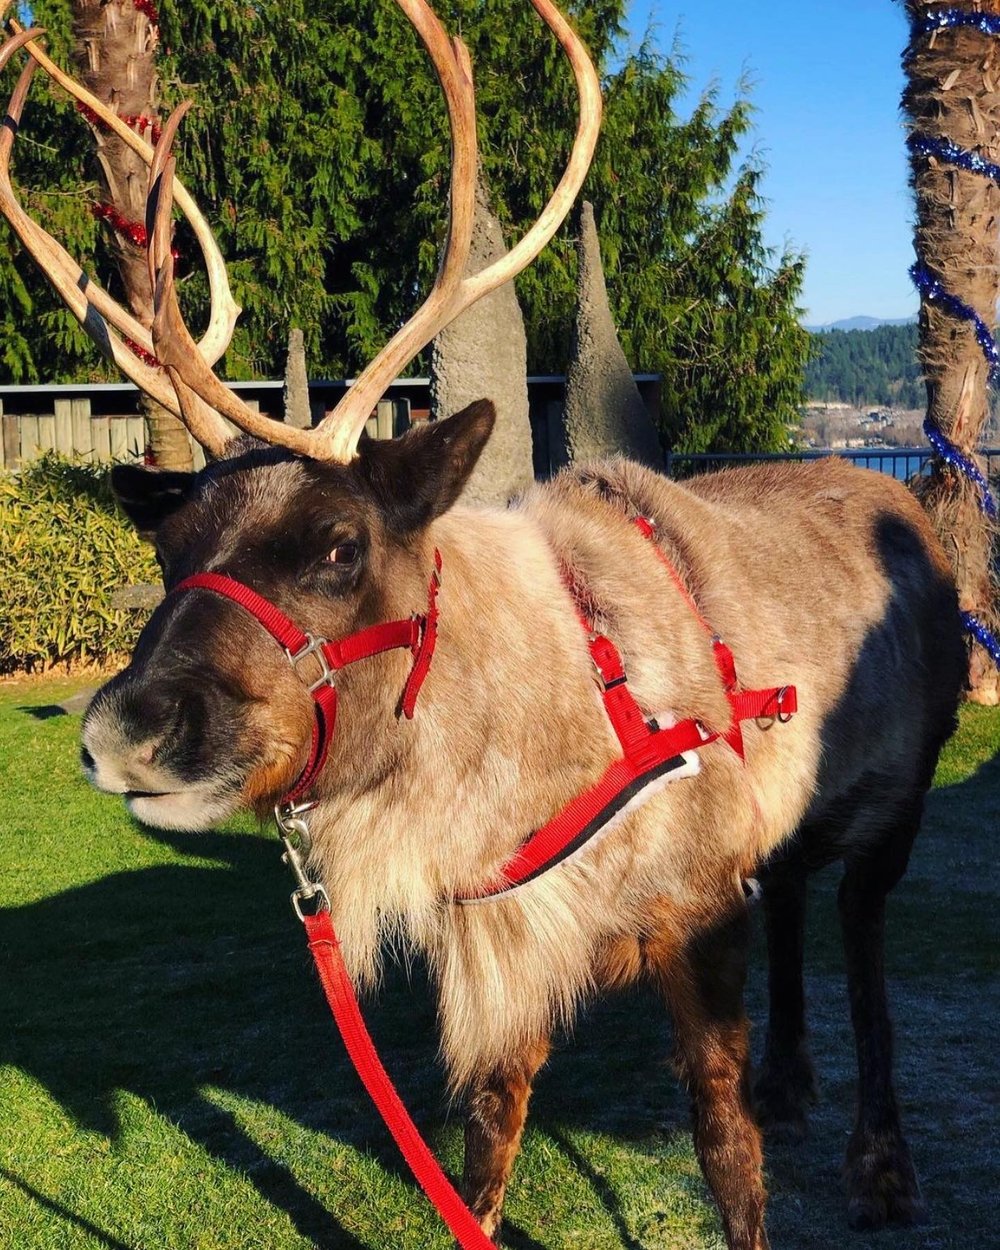 A Reindeer at Cougar Mountain Zoo